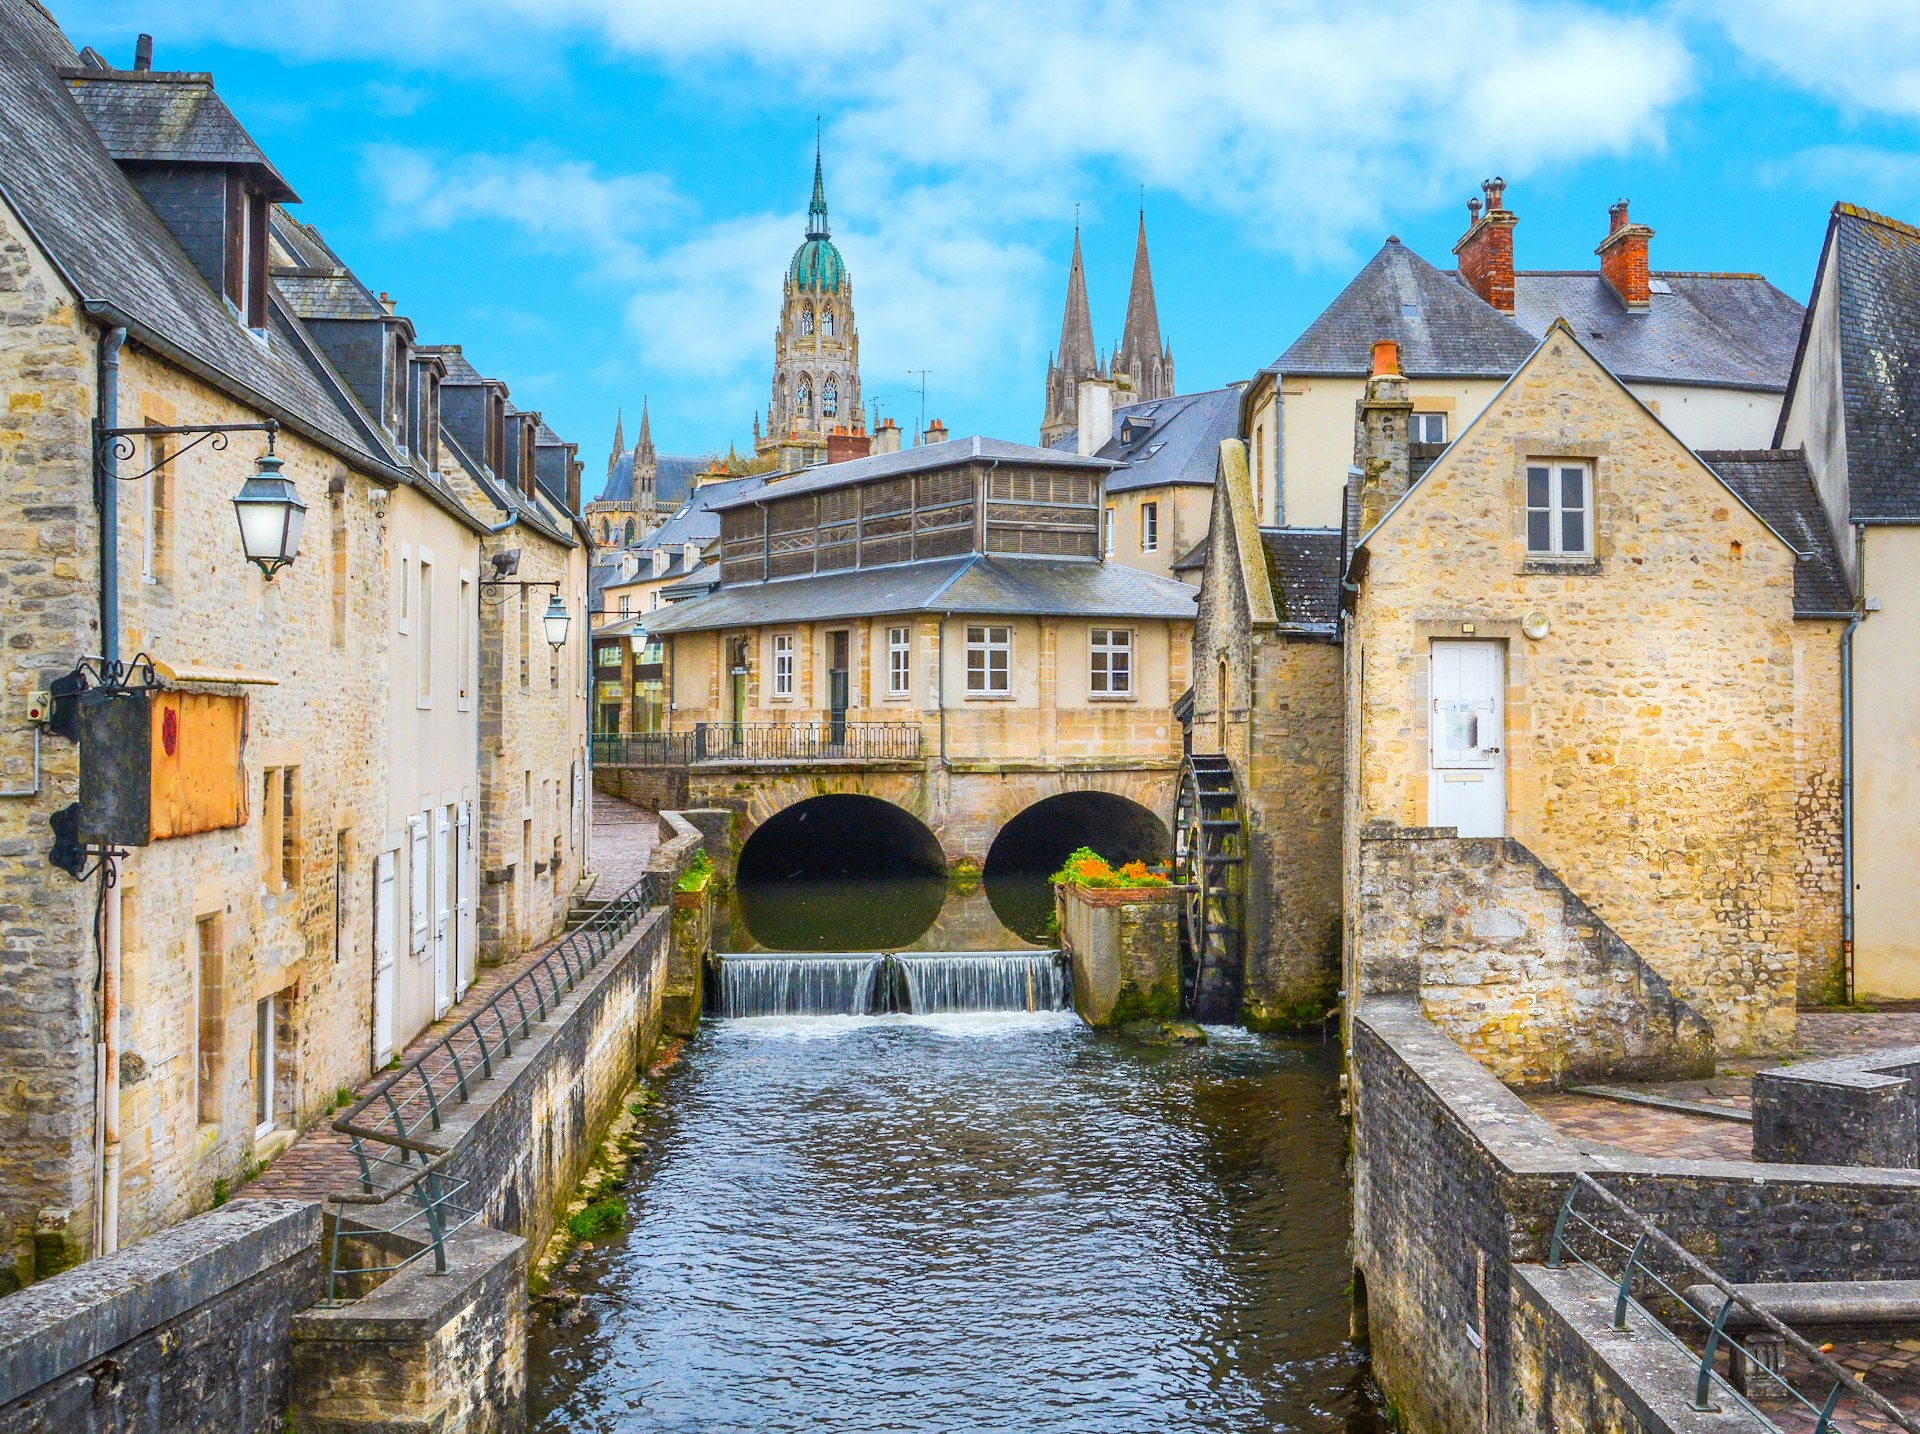 A small river runs between buildings in a town with Gothic architecture